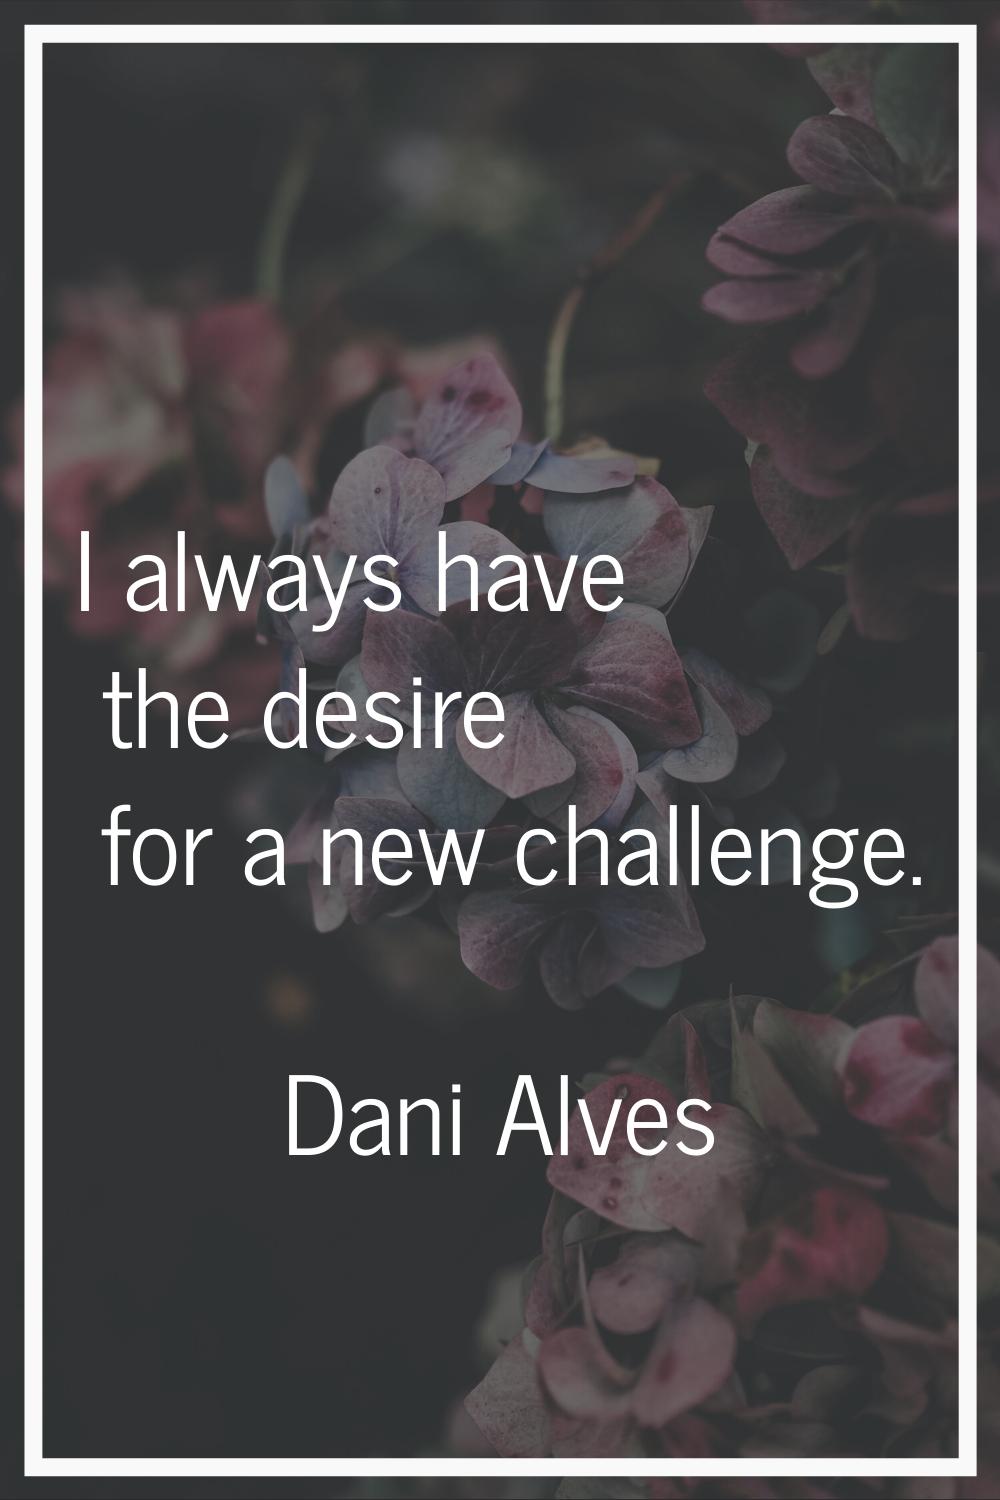 I always have the desire for a new challenge.